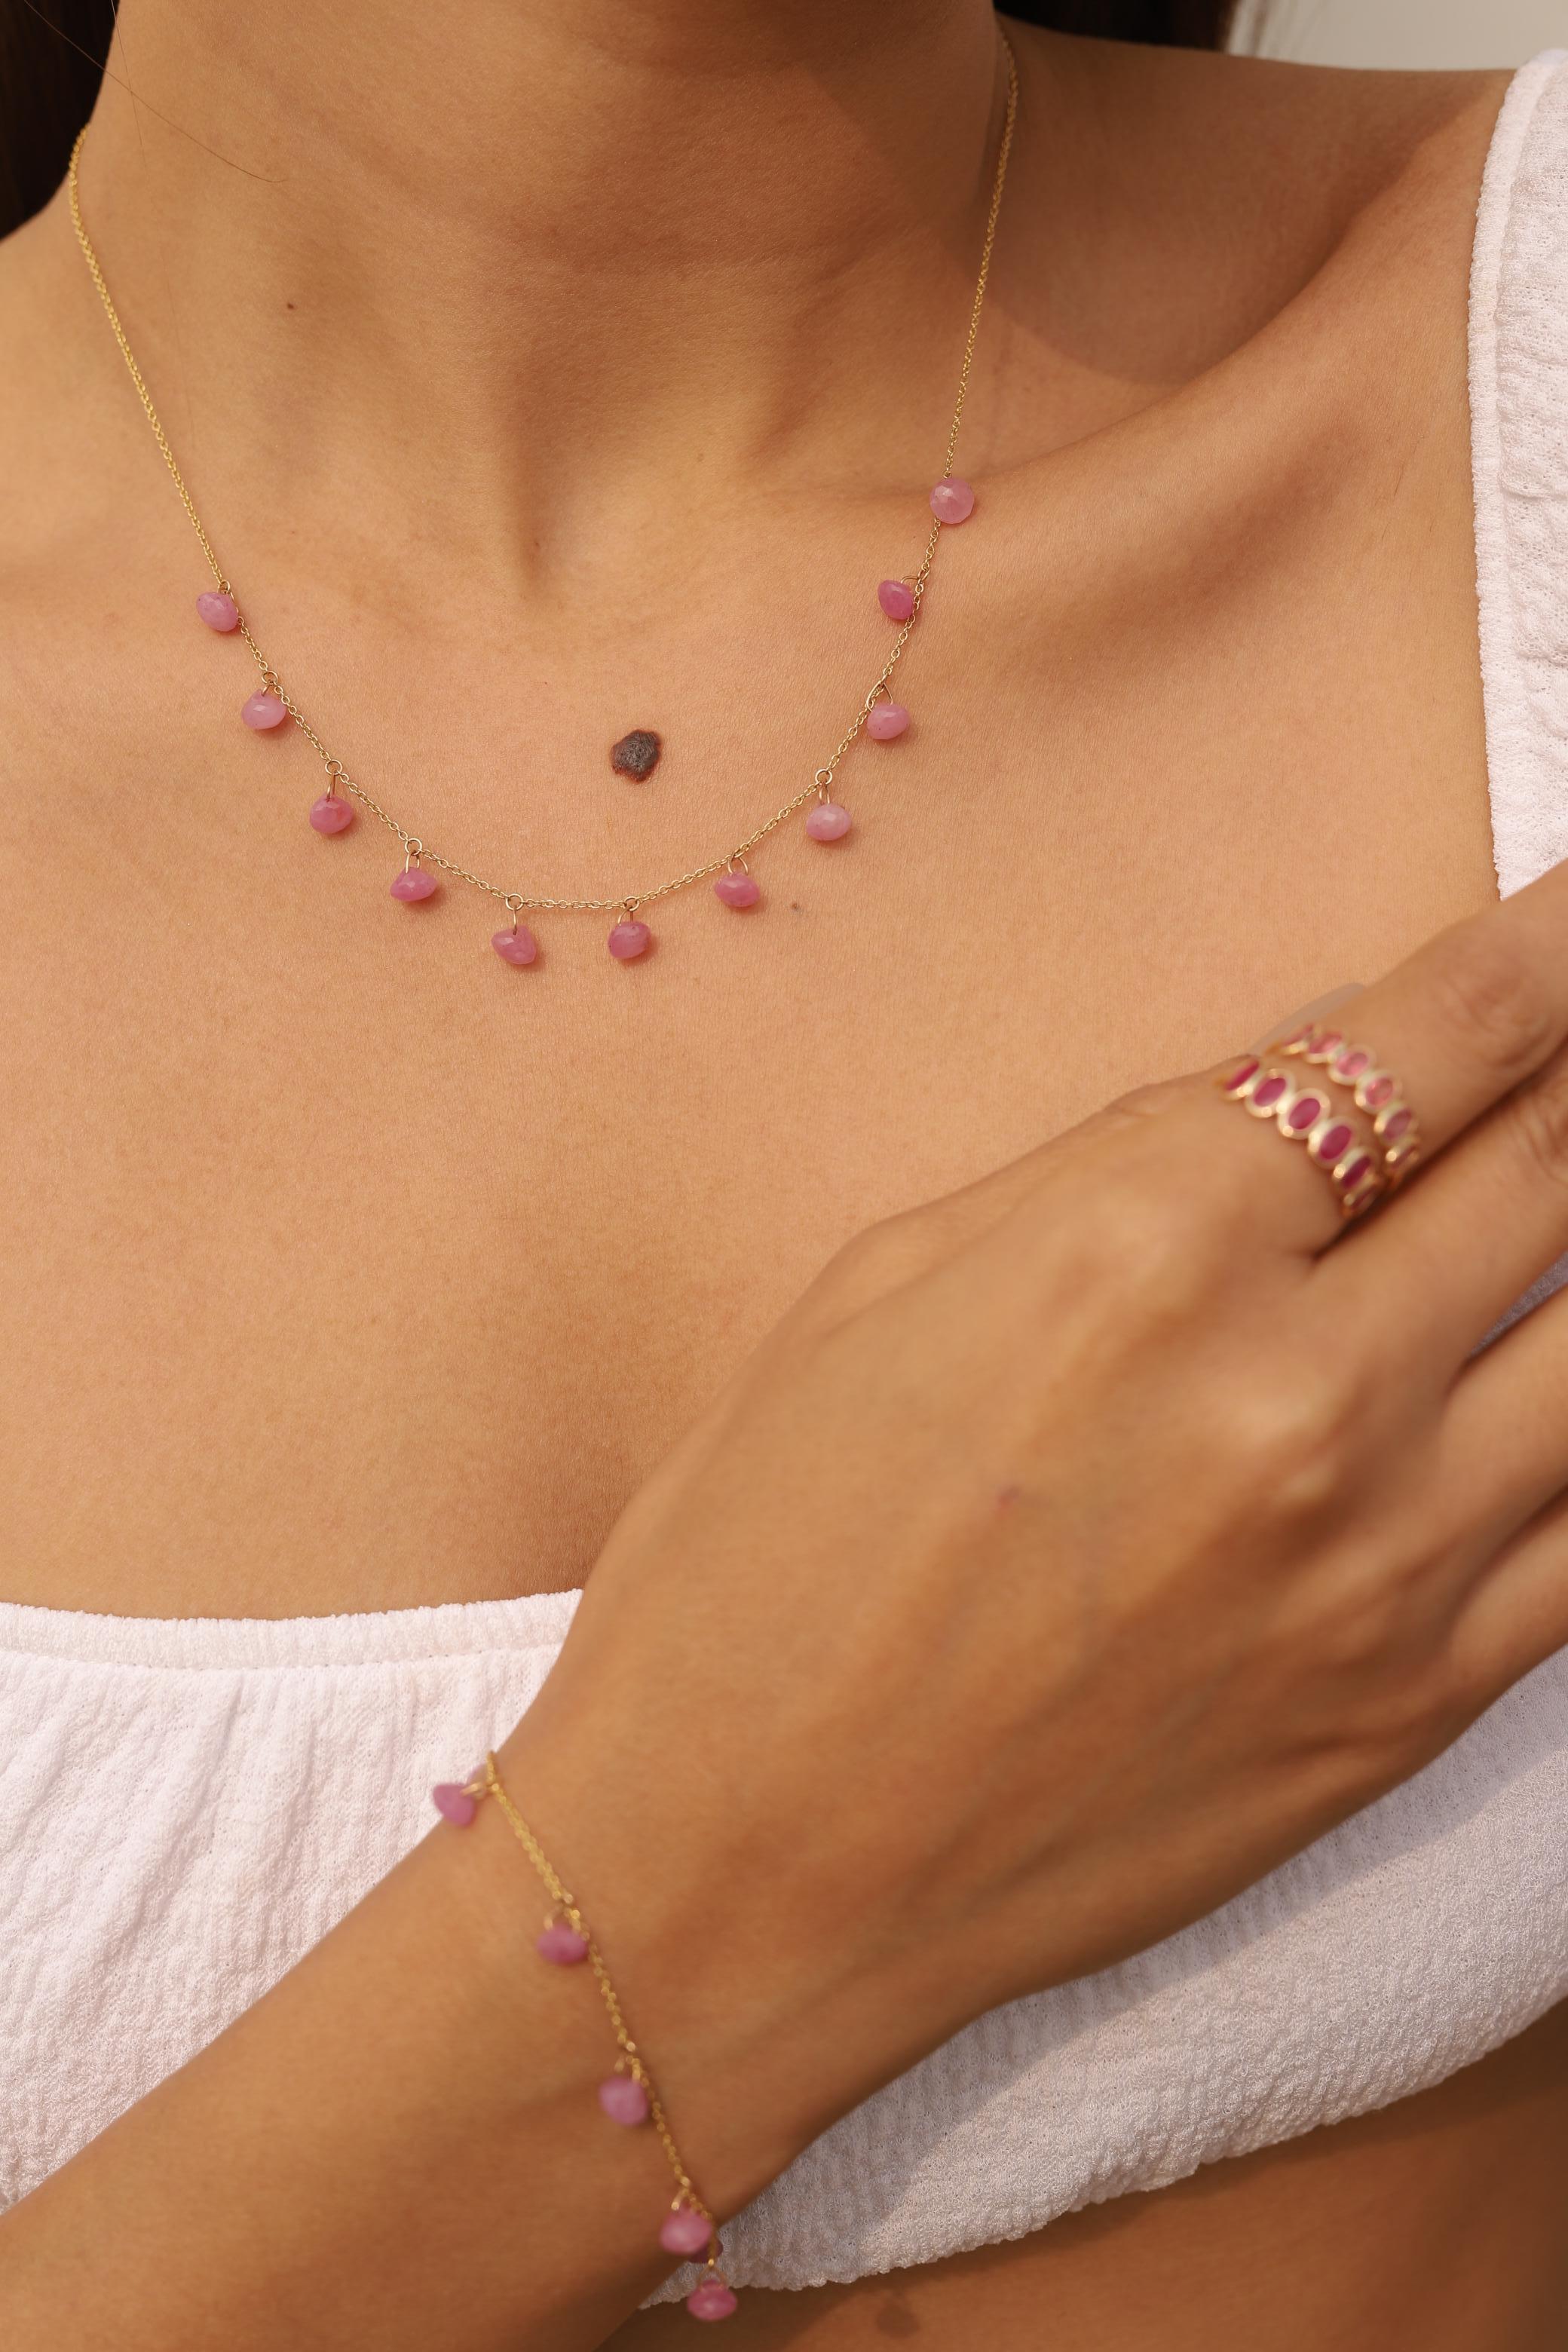 Pink Sapphire Necklace in 18K Gold studded with drop cut sapphire pieces.
Accessorize your look with this elegant pink sapphire drop necklace. This stunning piece of jewelry instantly elevates a casual look or dressy outfit. Comfortable and easy to